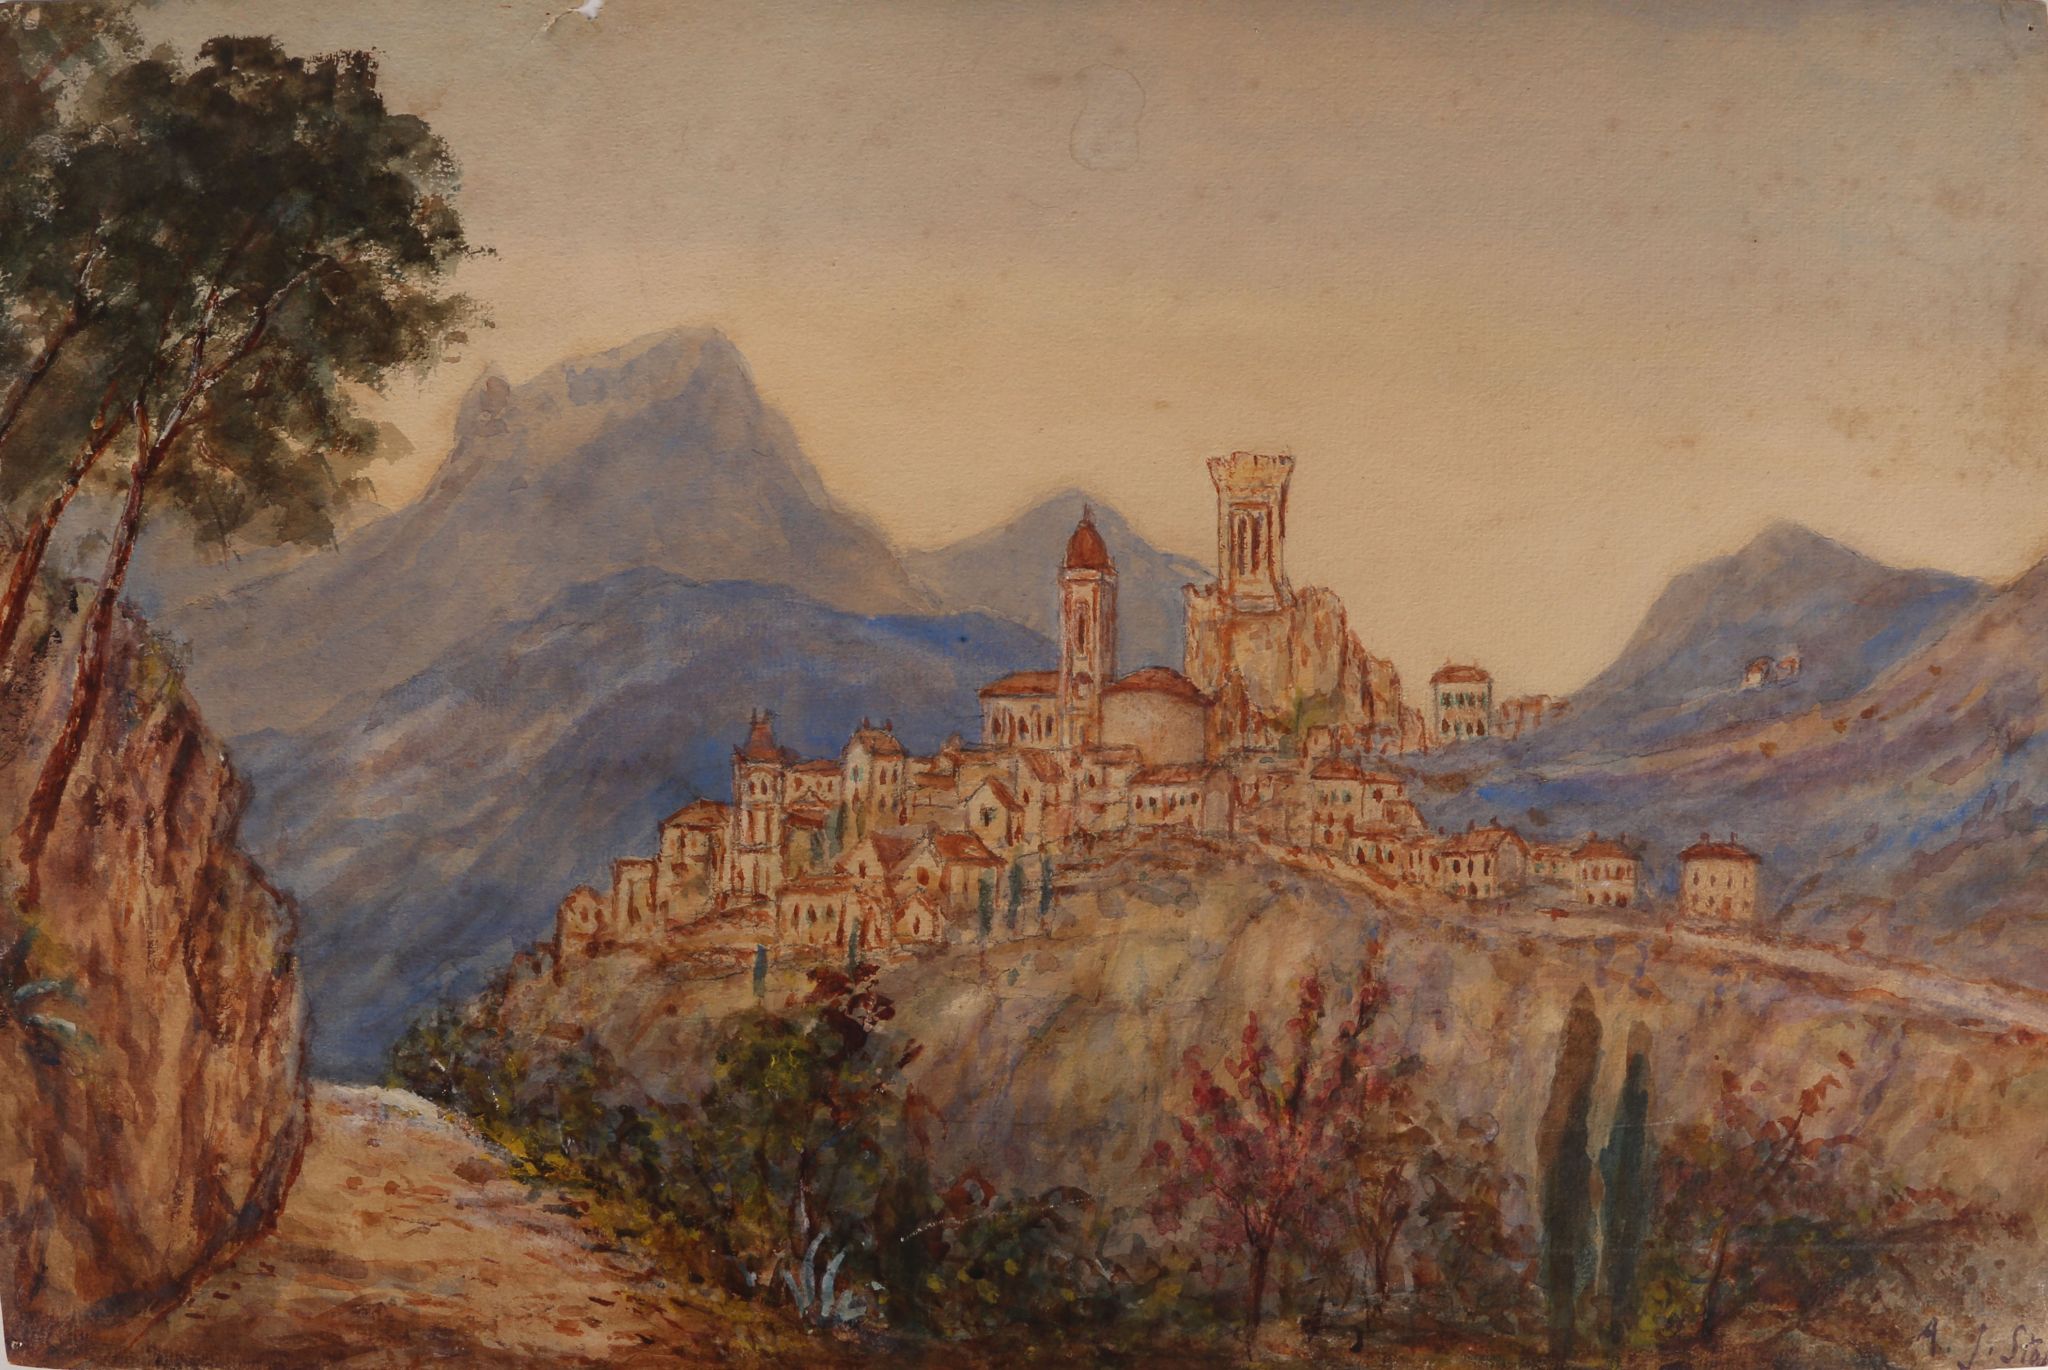 A selection of early 20th Century watercolour studies of the Italian Coast, including views of the